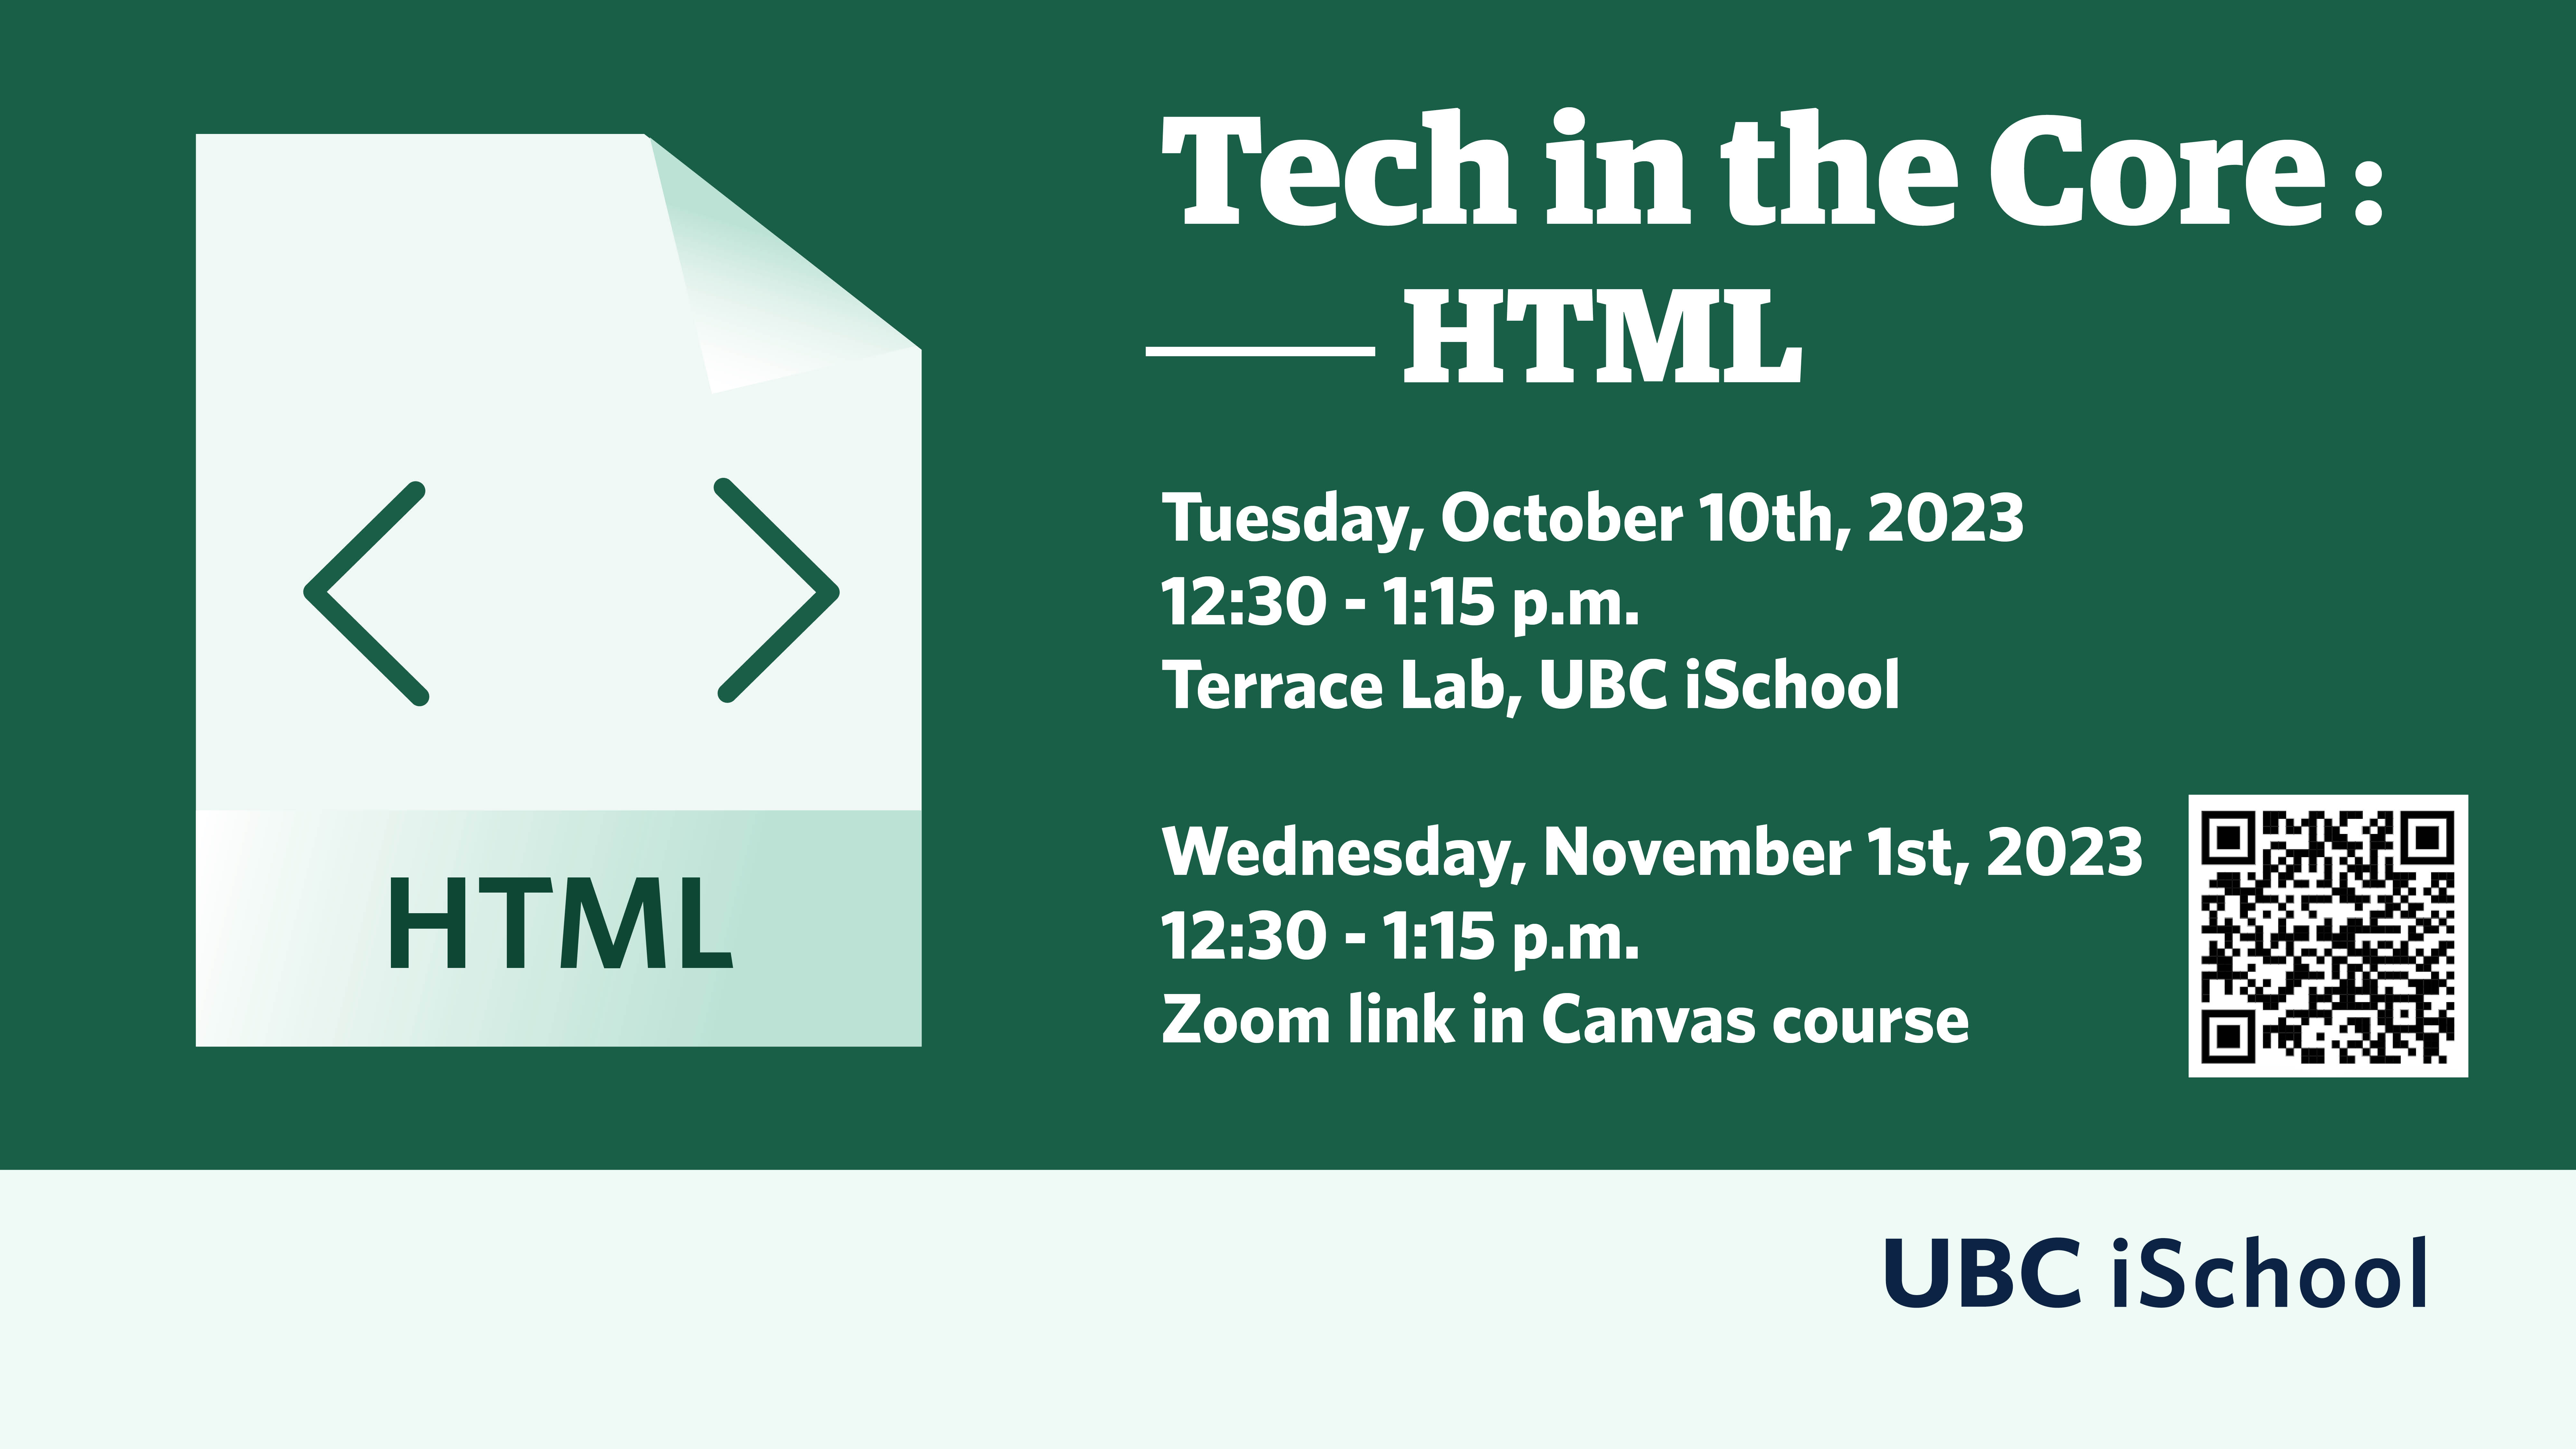 Poster advertising the HTML workshop.